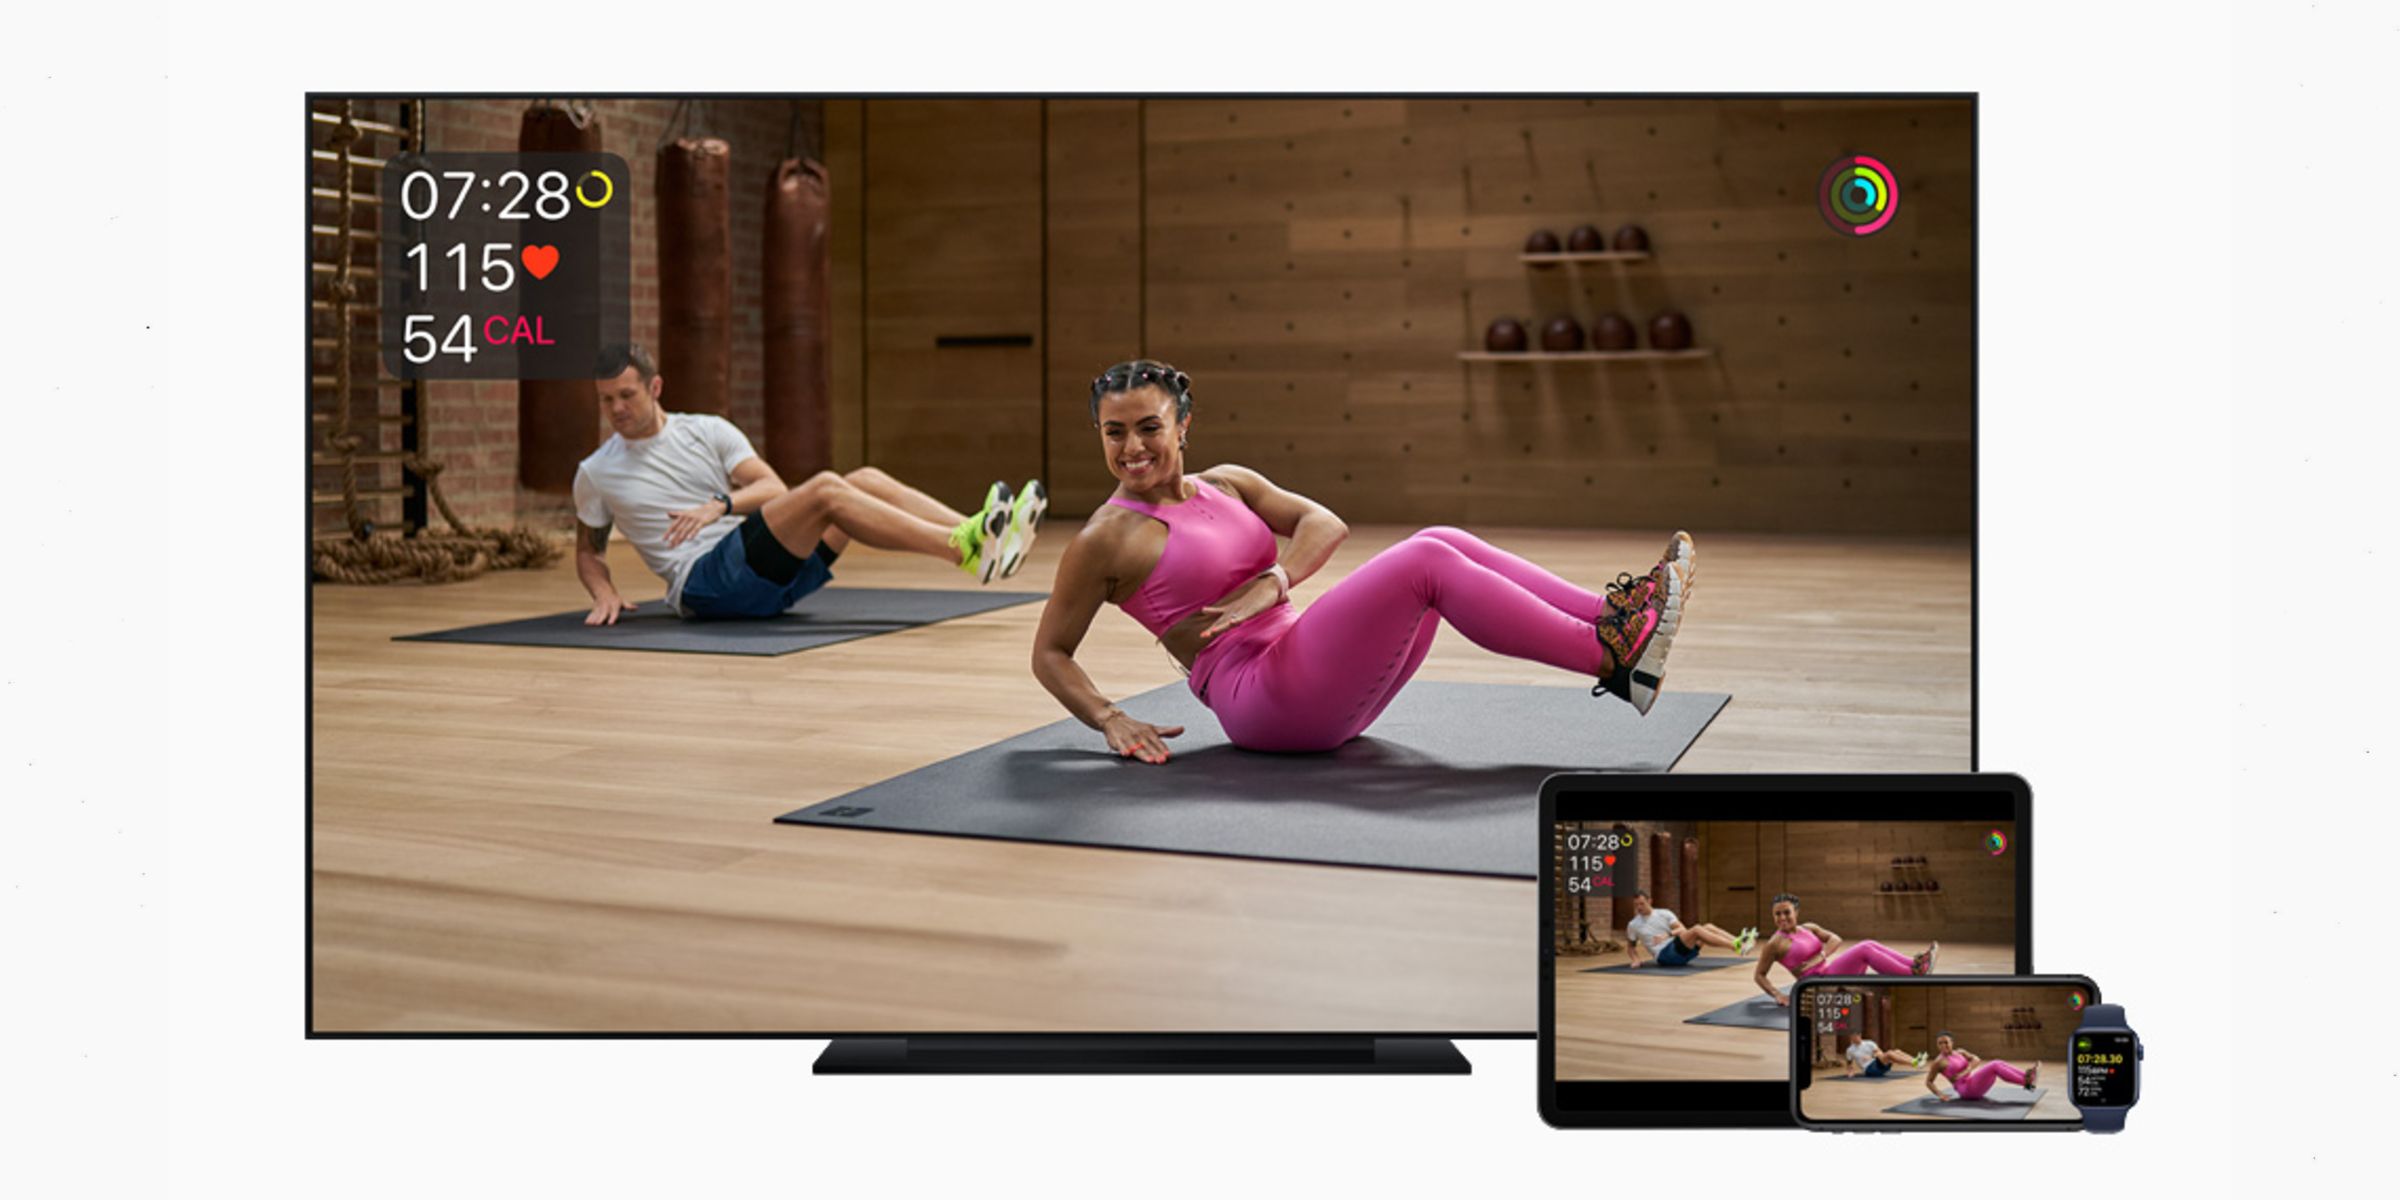 The Apple Fitness+ has many personal trainers